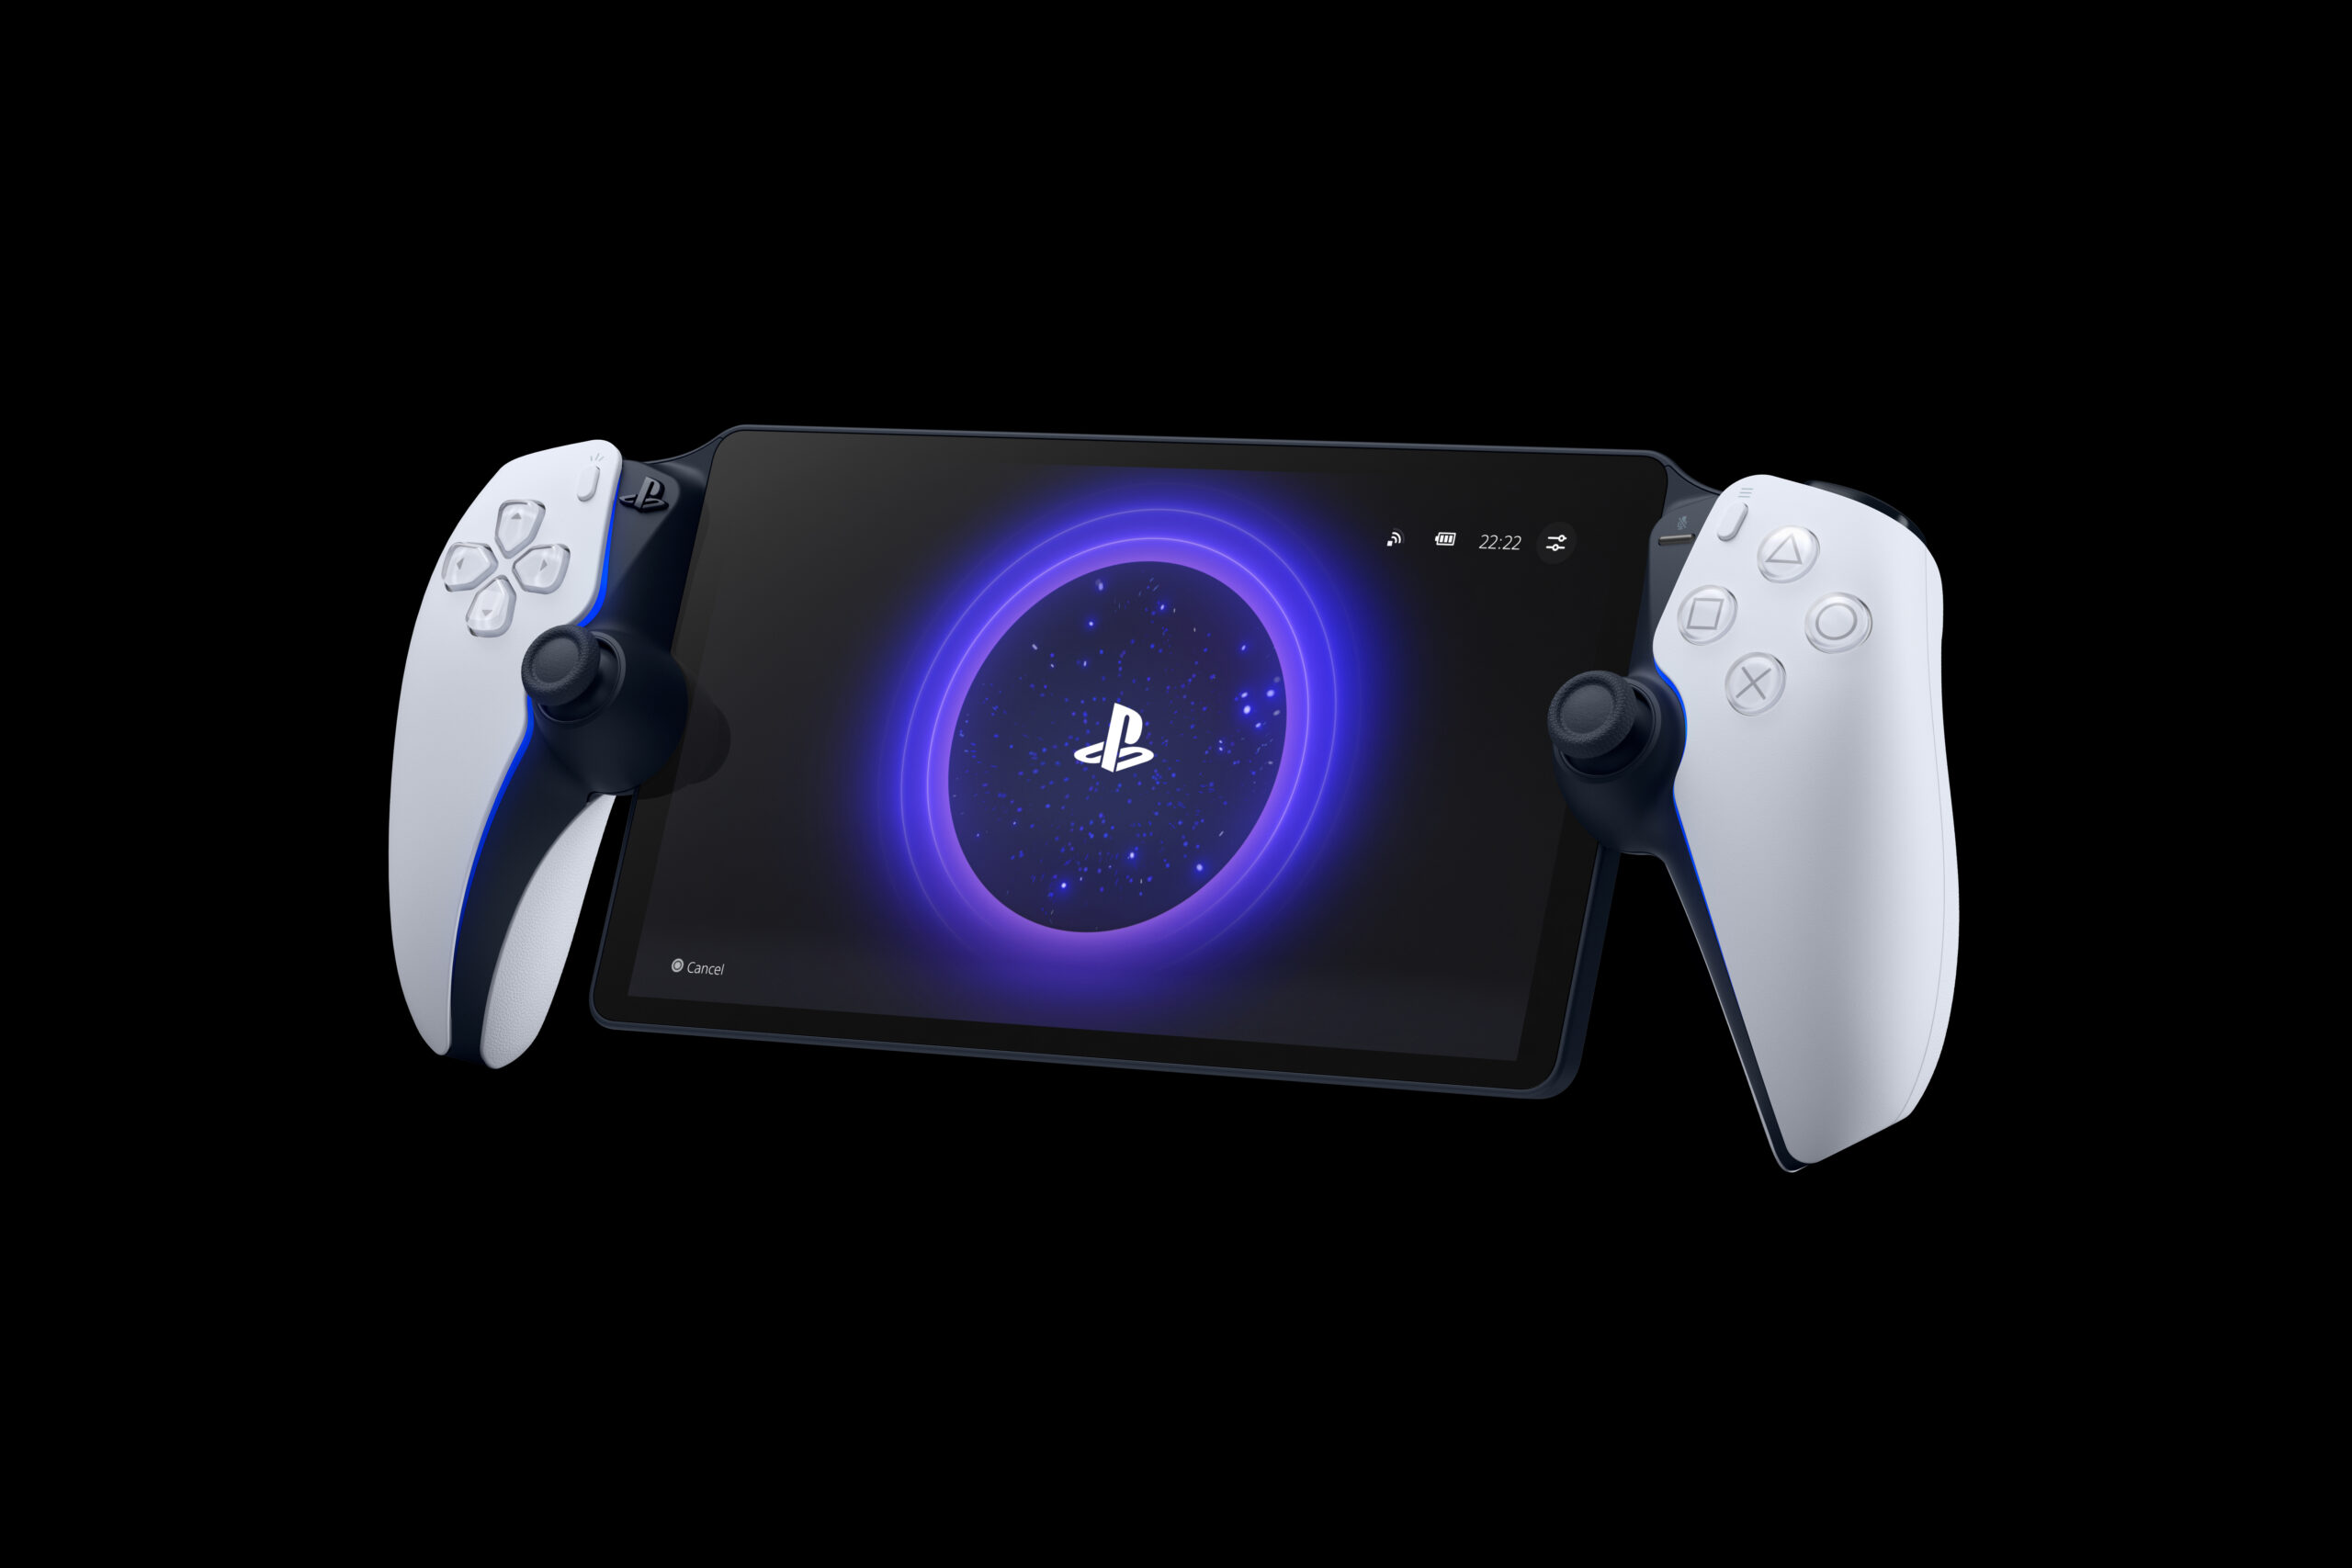 New PS5 Console Coming? Watch Sony's Showcase on the CES 2023 this January  4